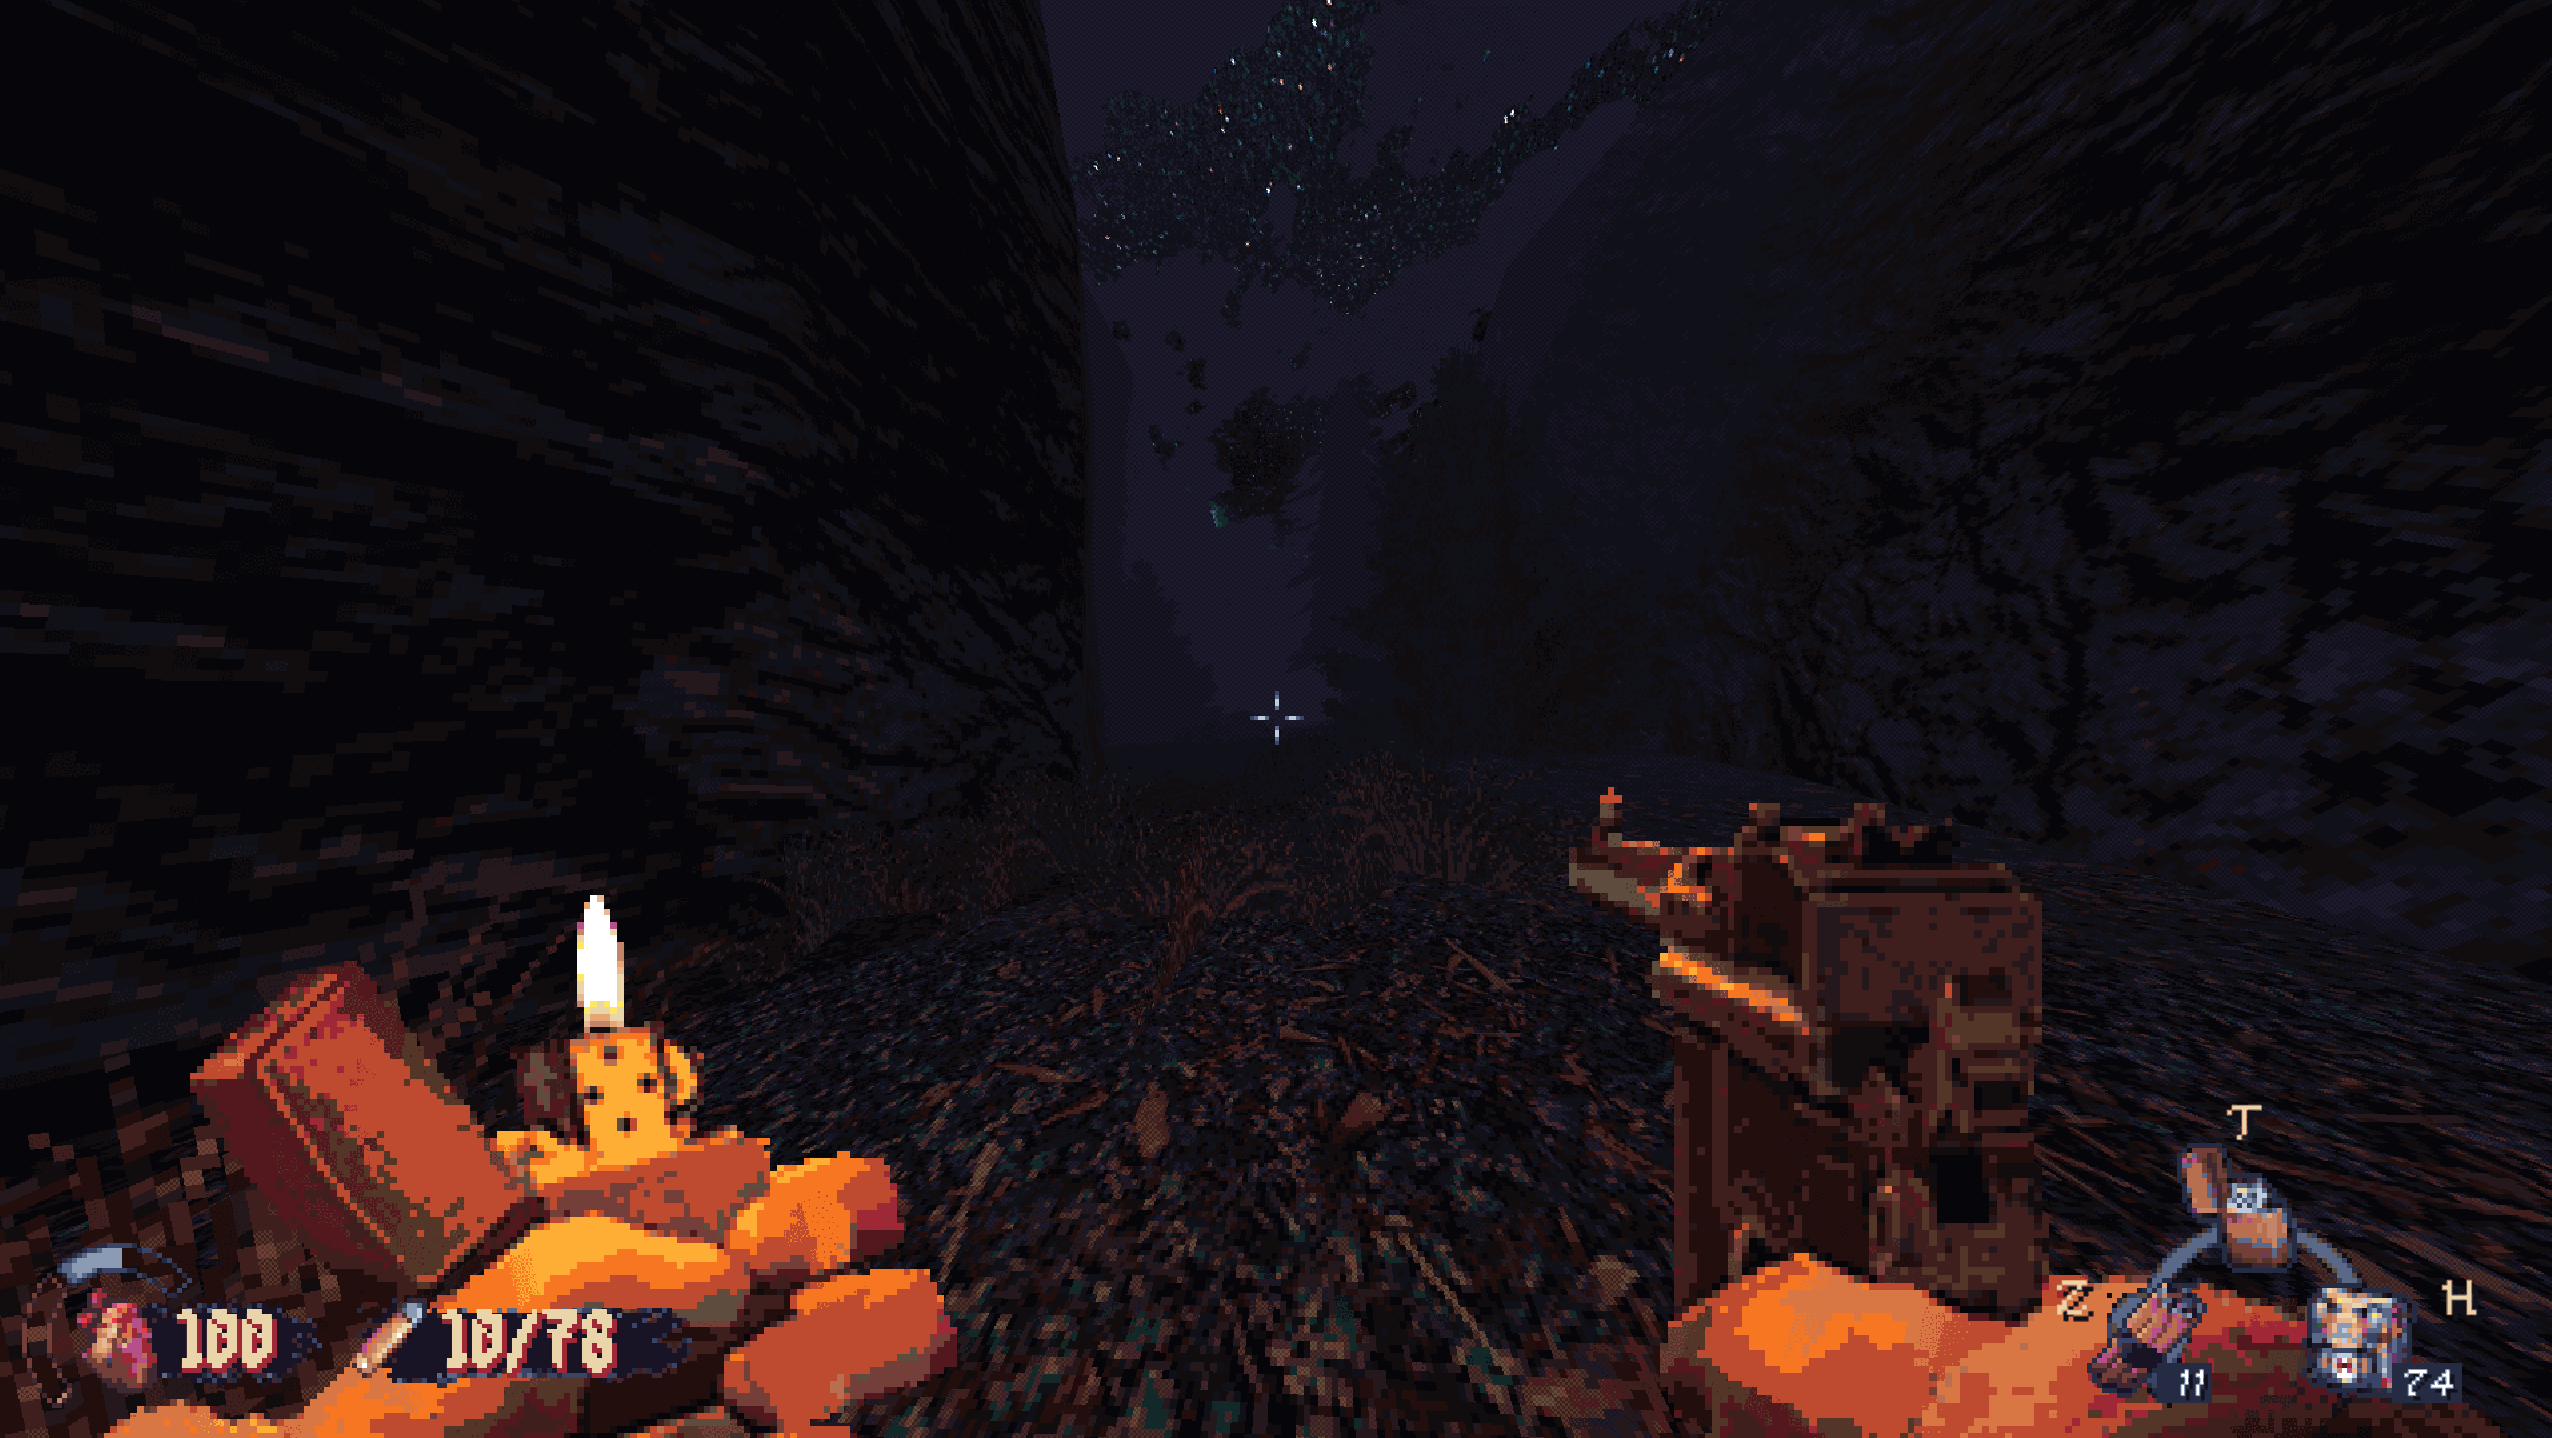 The player in a dark forest wielding a pistol and using a lighter as a light source